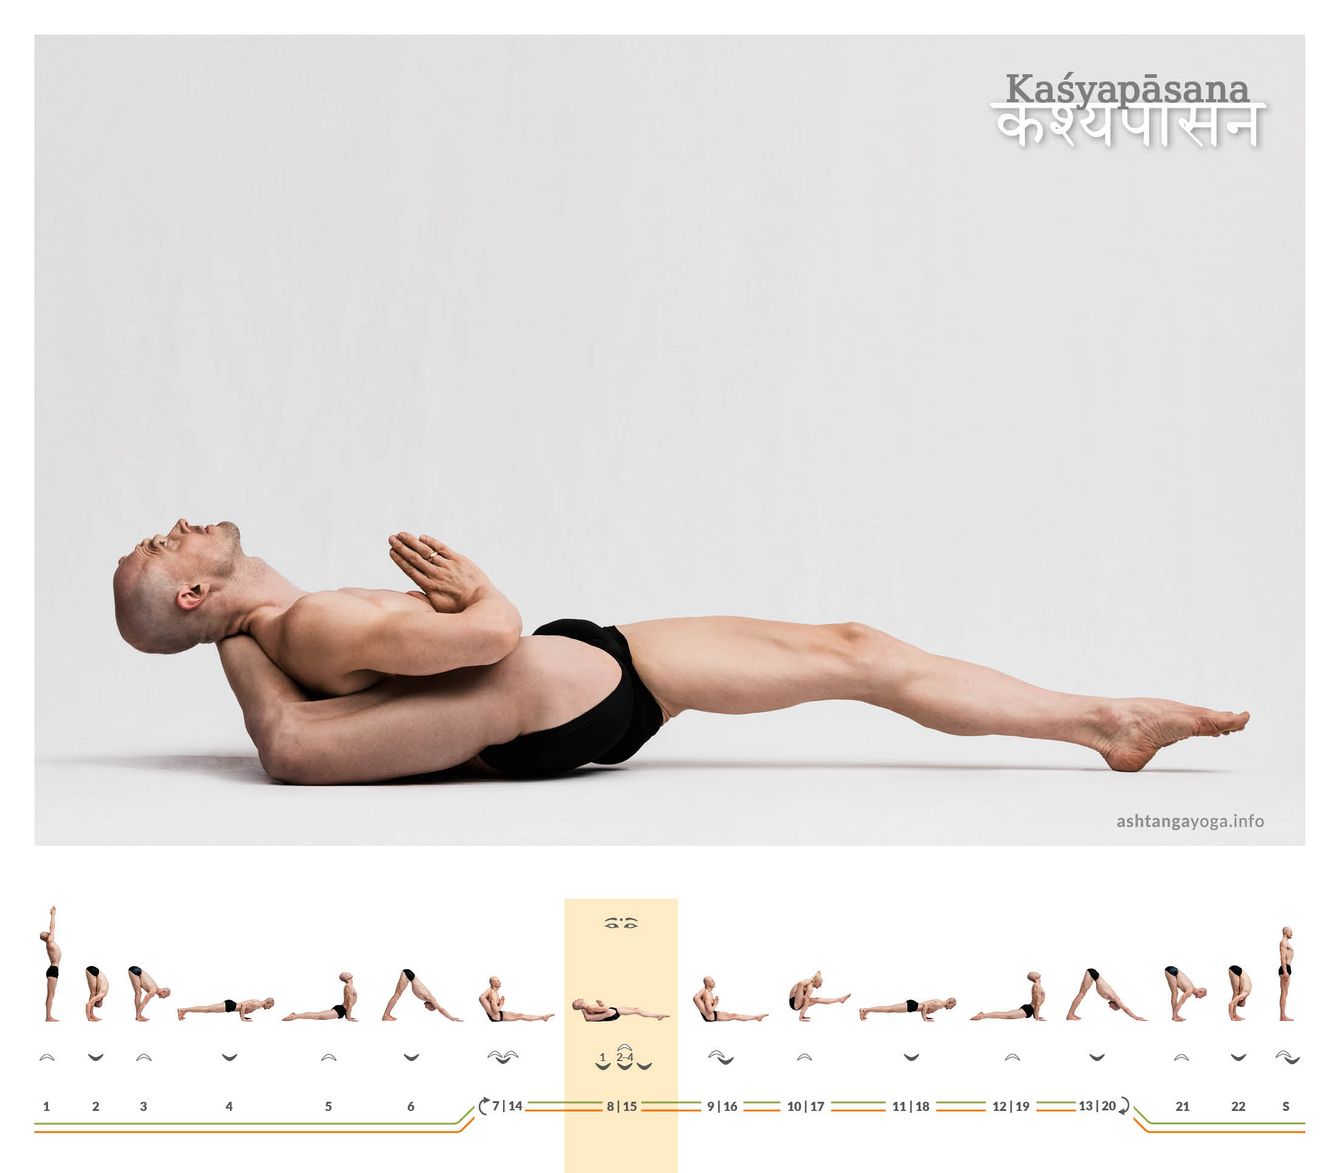 The "Pose Named after Kashyapa" is the first of five poses with one foot behind the head. In this variation, we are in a supine position.